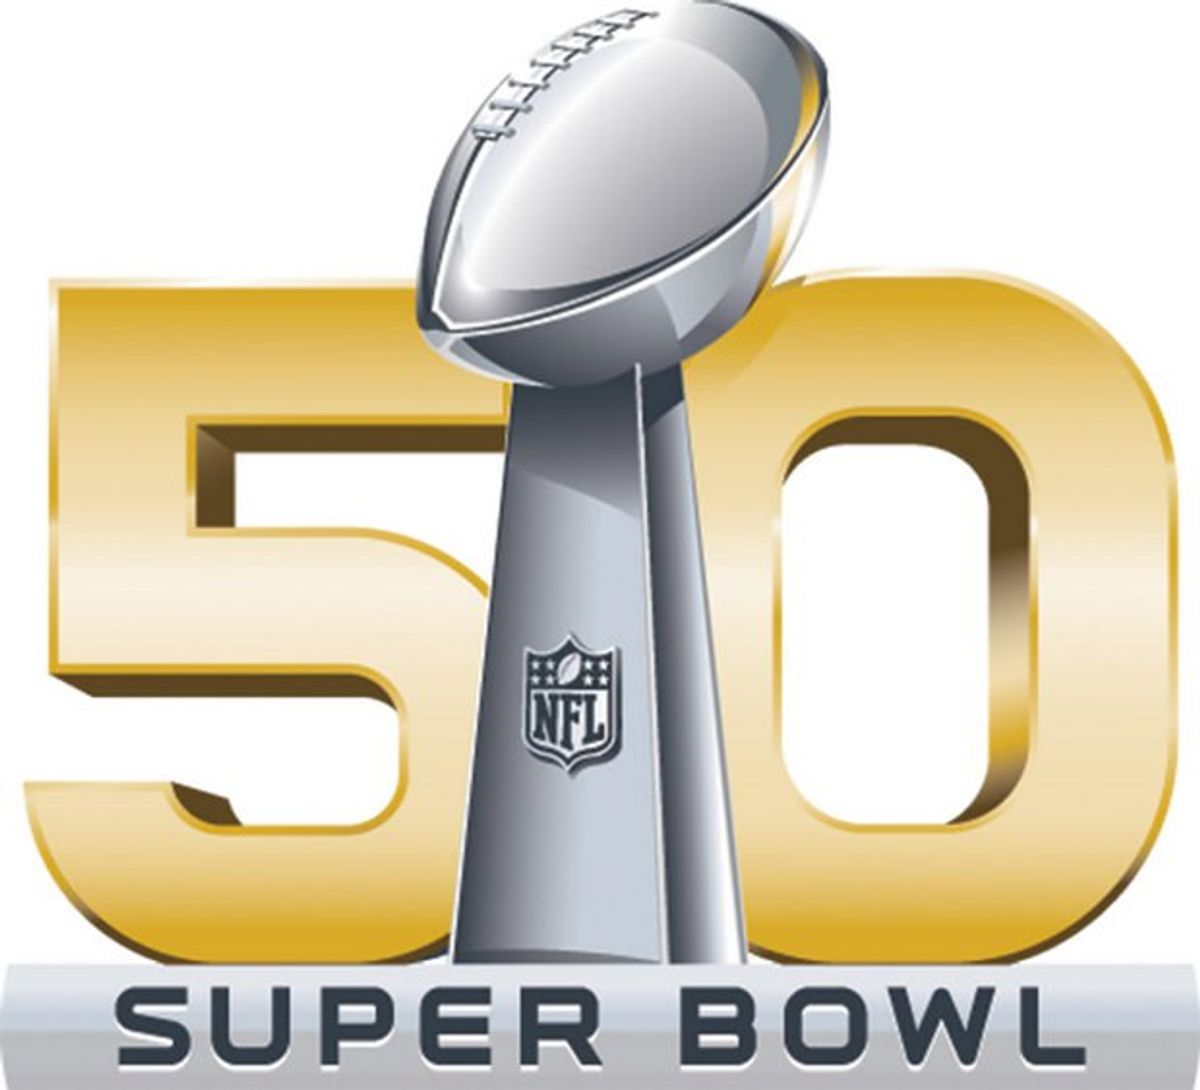 Definitive Ranking Of The Best Super Bowl 50 Commercials